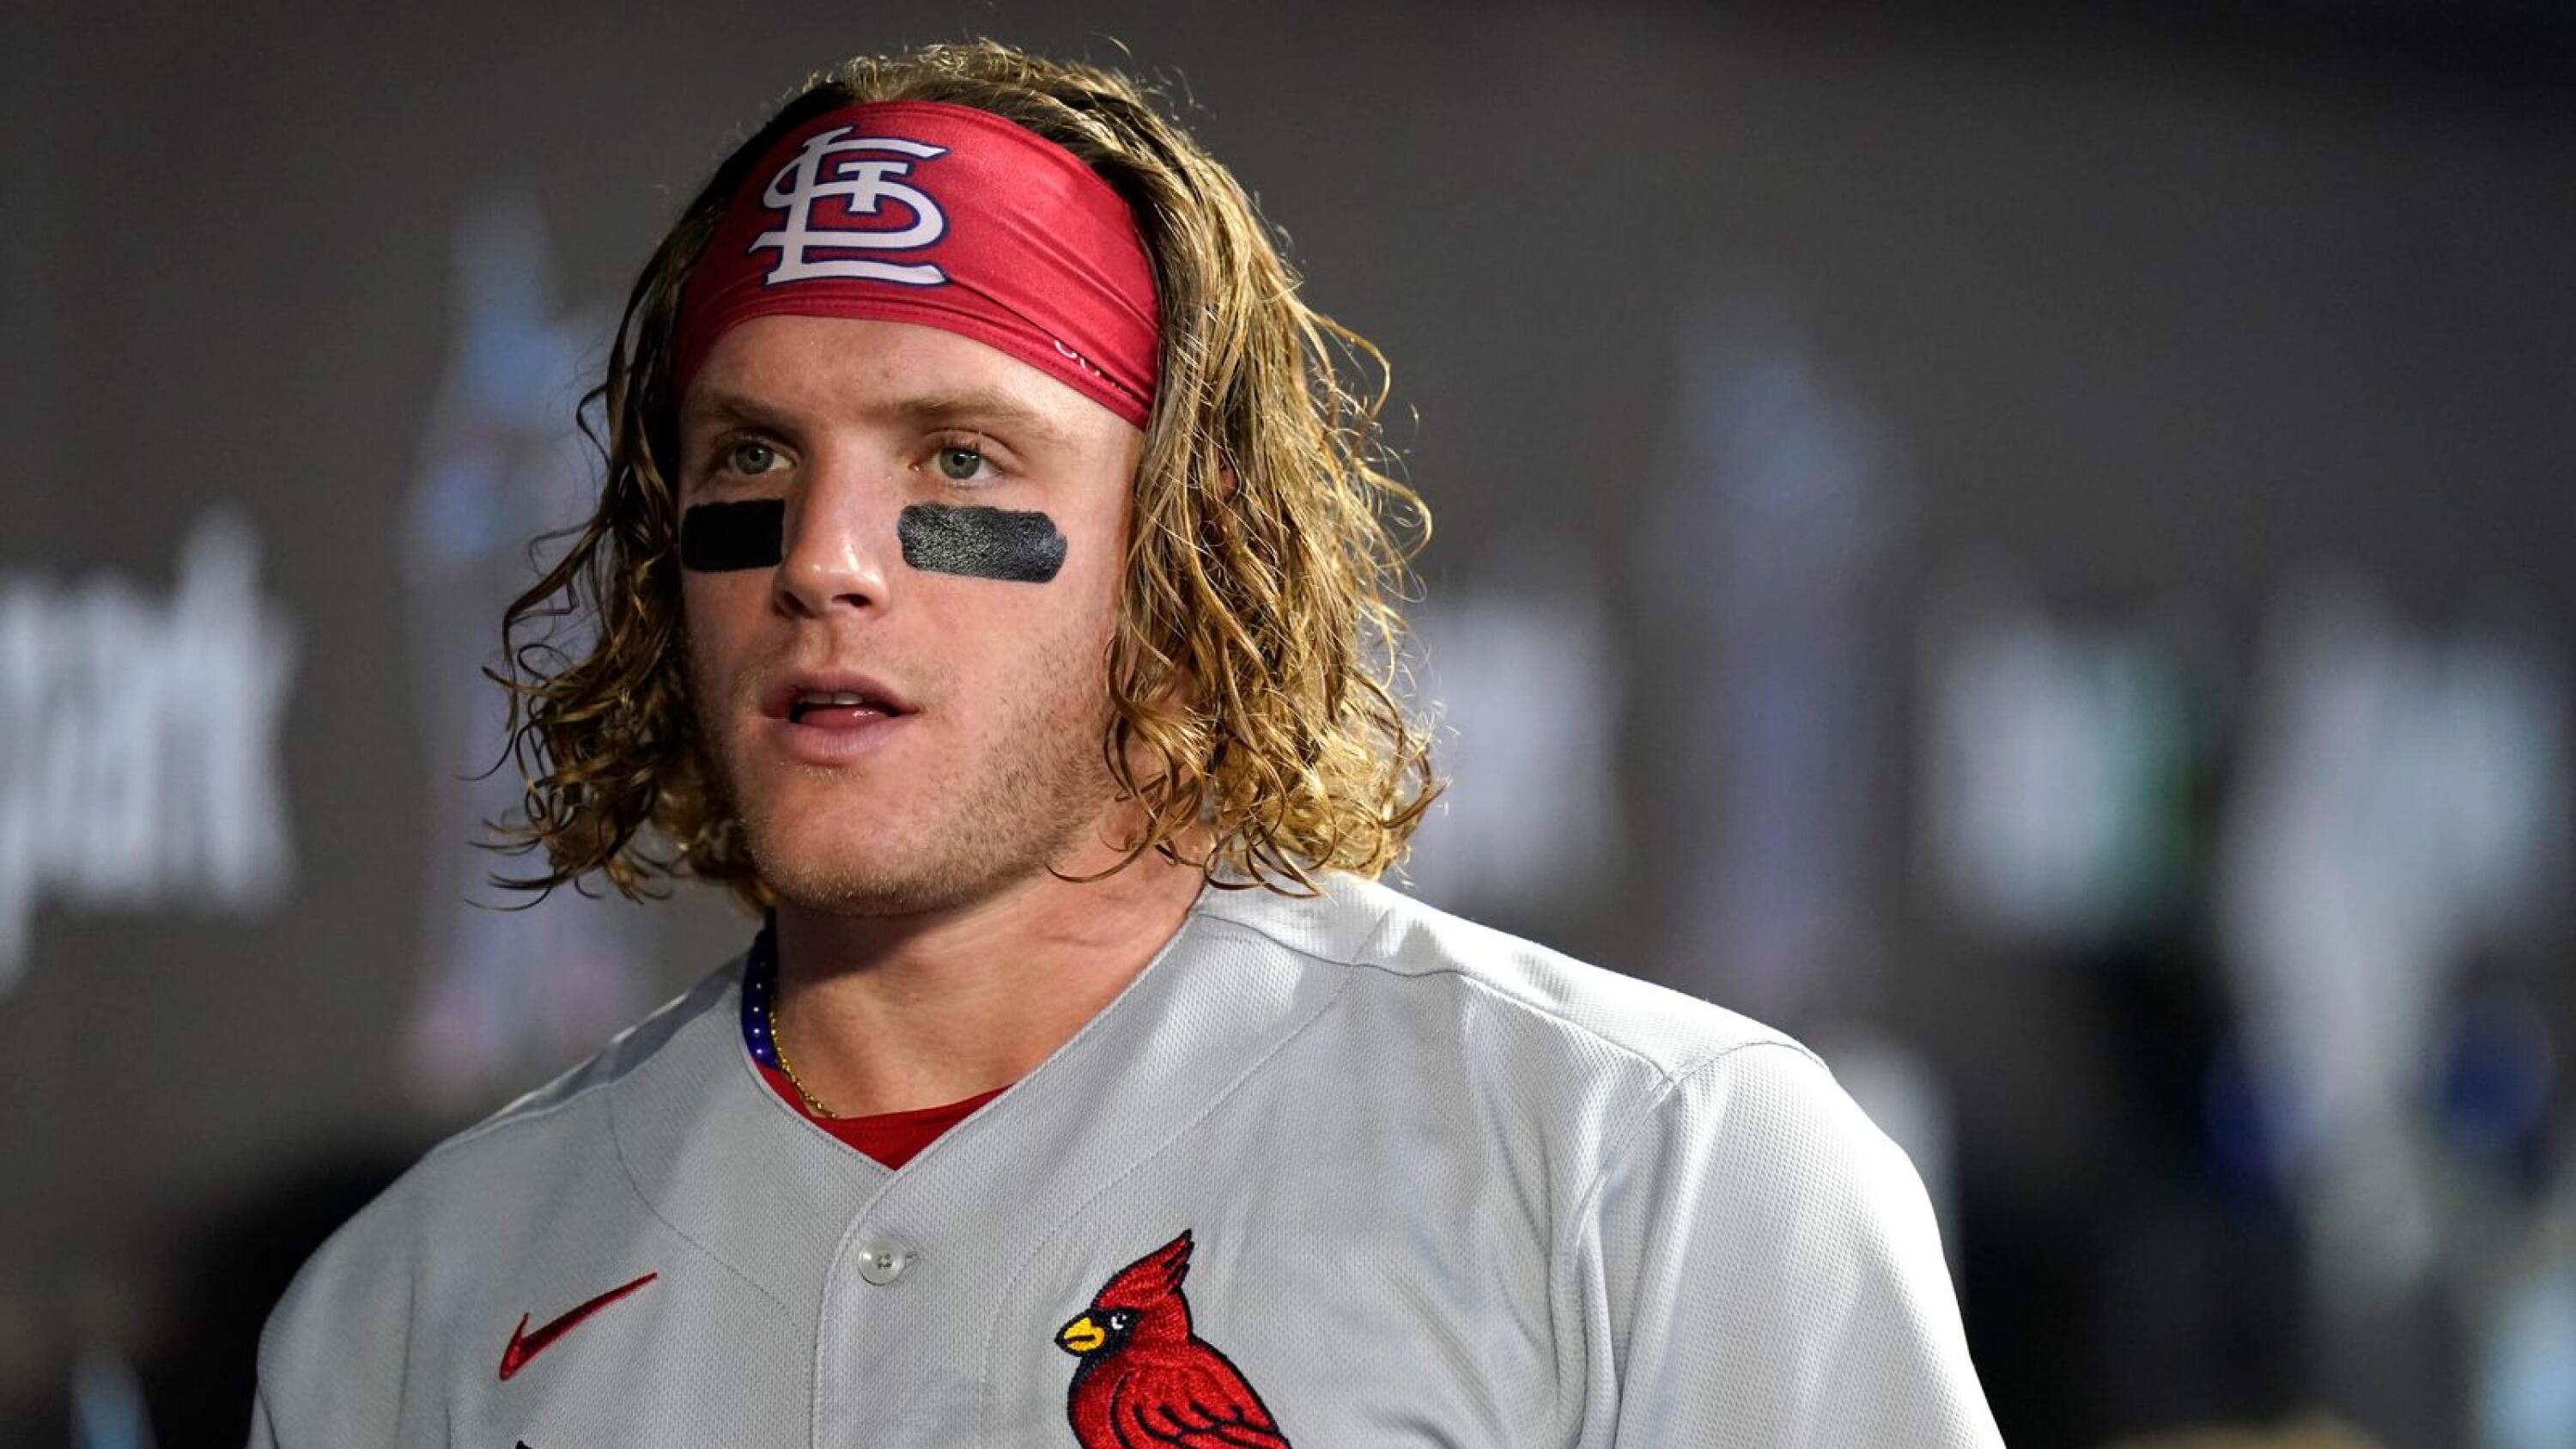 St. Louis Cardinals: Yankees fans upset with Harrison Bader trade